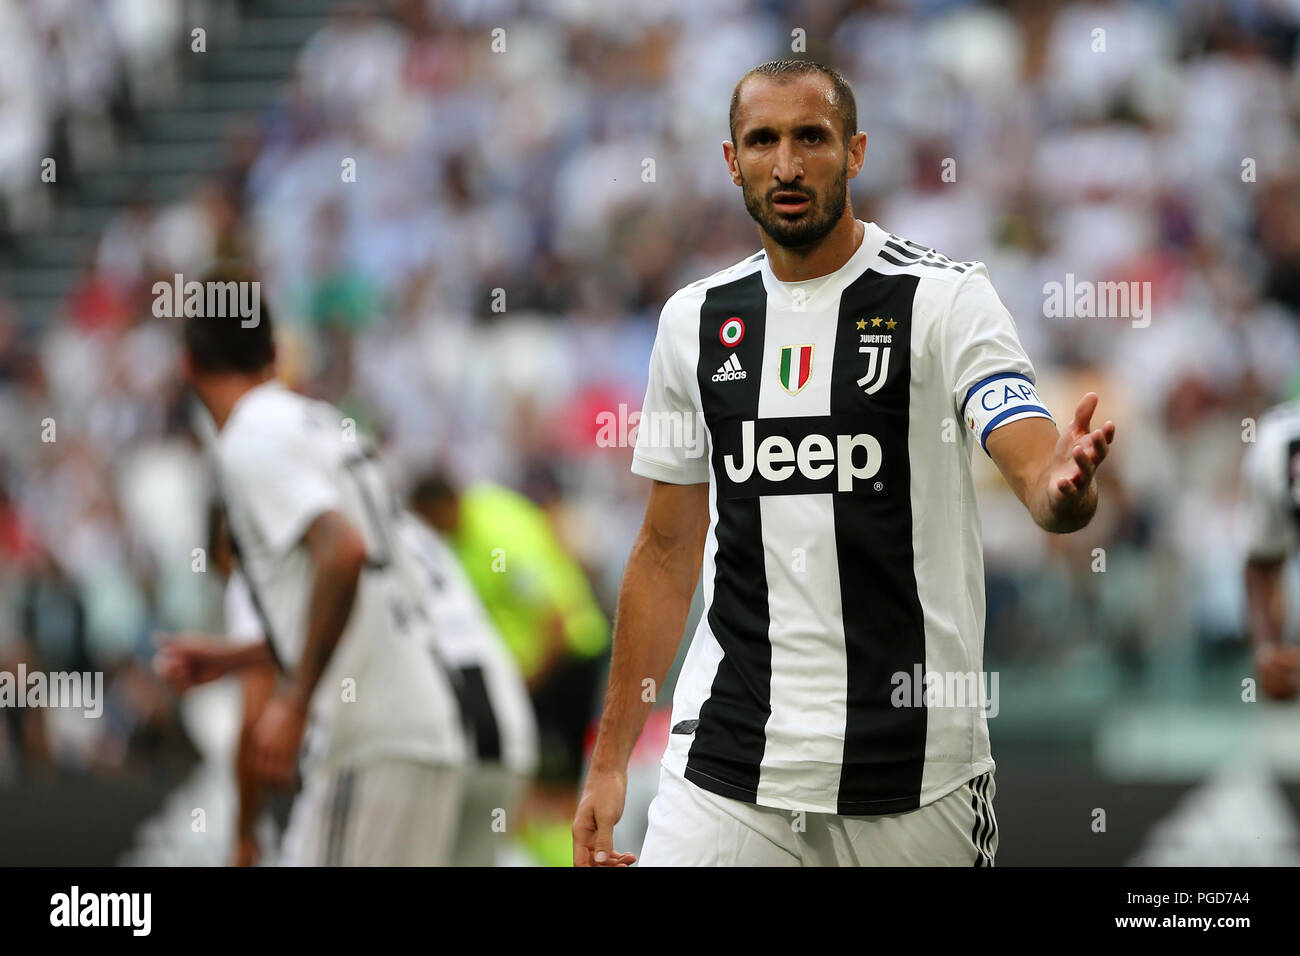 Torino, Italy. 25th August, 2018.  Giorgio Chiellini of Juventus FC  during the Serie A football match between Juventus Fc and SS Lazio.  Credit: Marco Canoniero / Alamy Live News Credit: Marco Canoniero/Alamy Live News Stock Photo